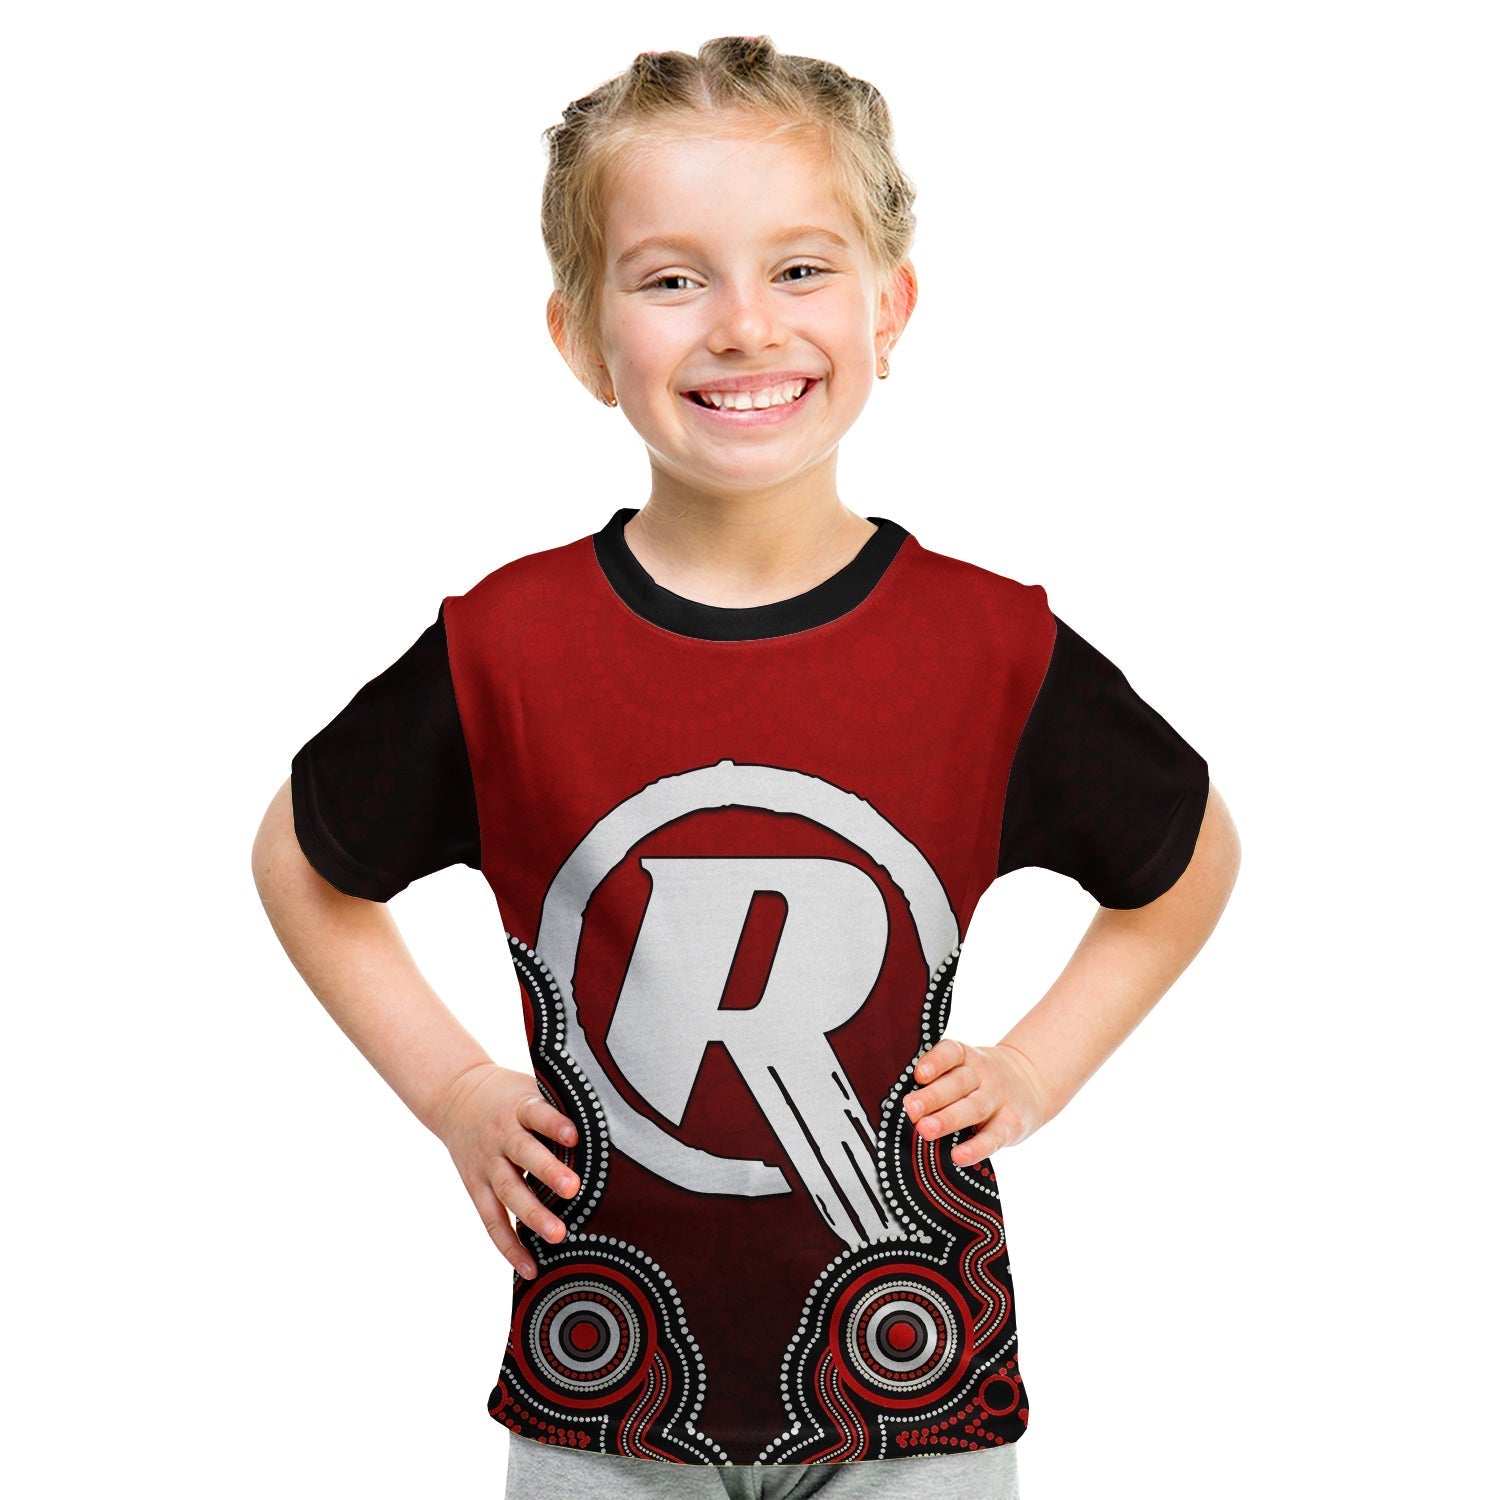 custom-personalised-and-number-melbourne-renegades-t-shirt-kid-cricket-aboriginal-style-lt6